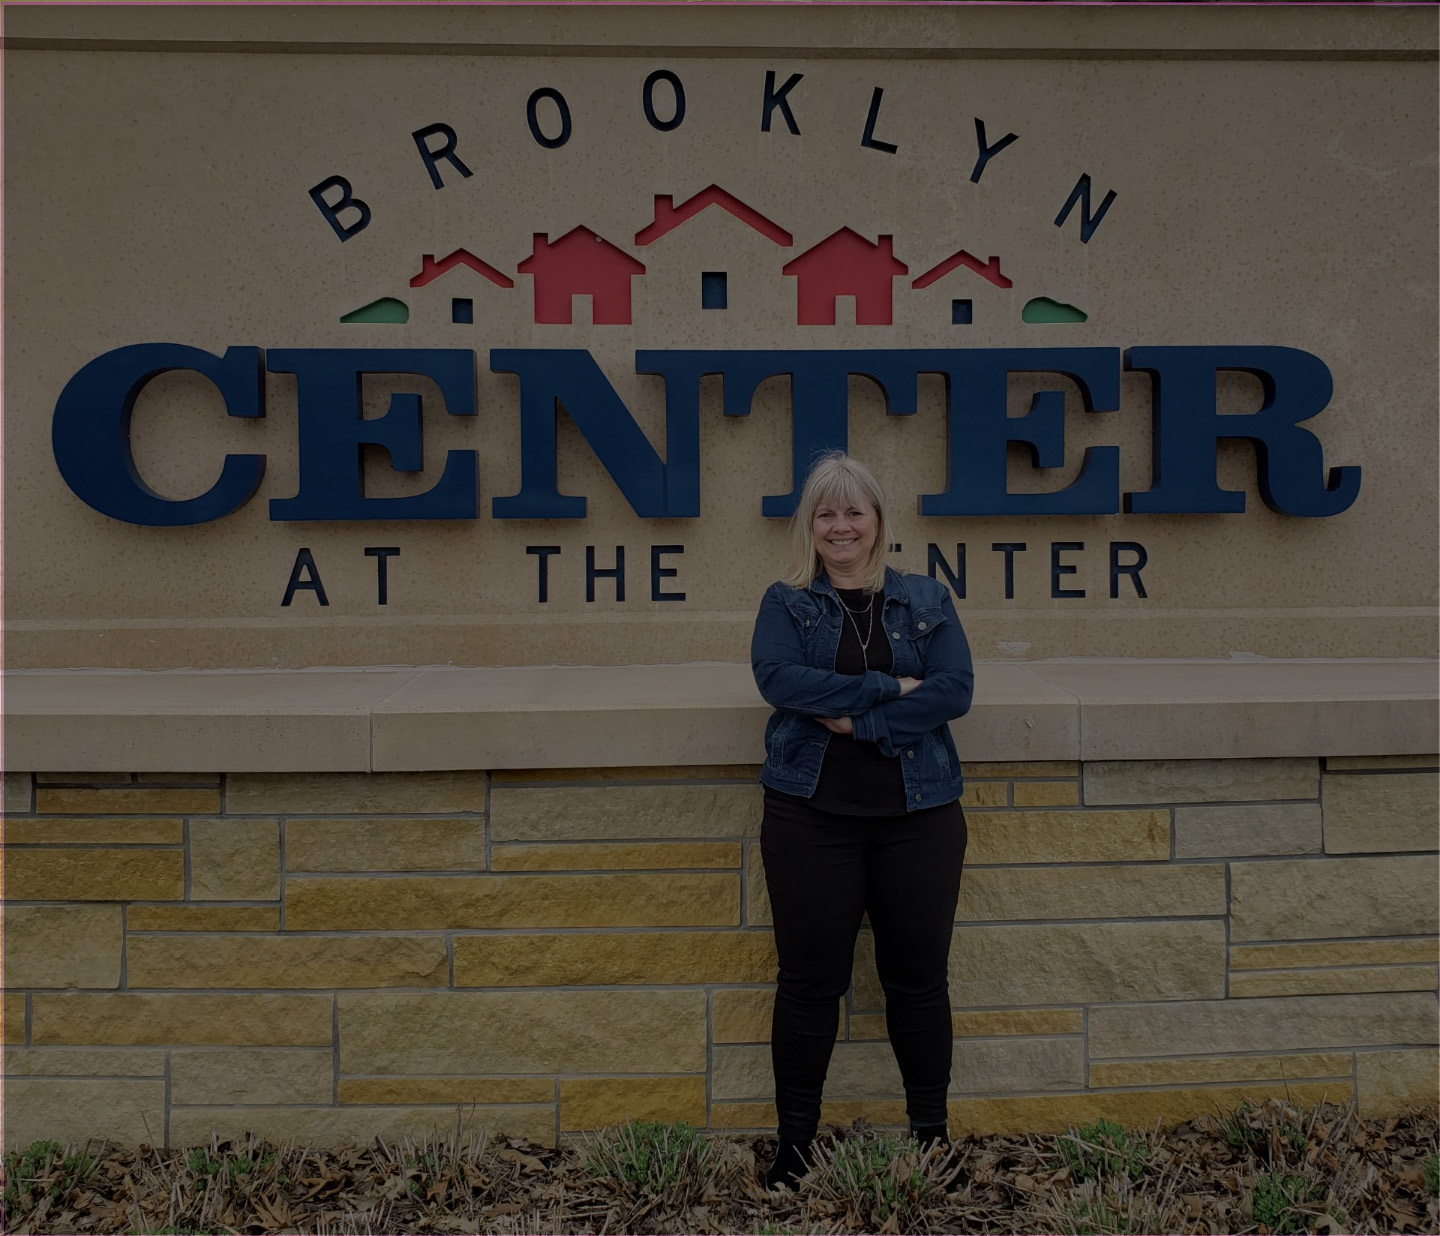 Gretchen Enger standing in front of Brooklyn Center city sign